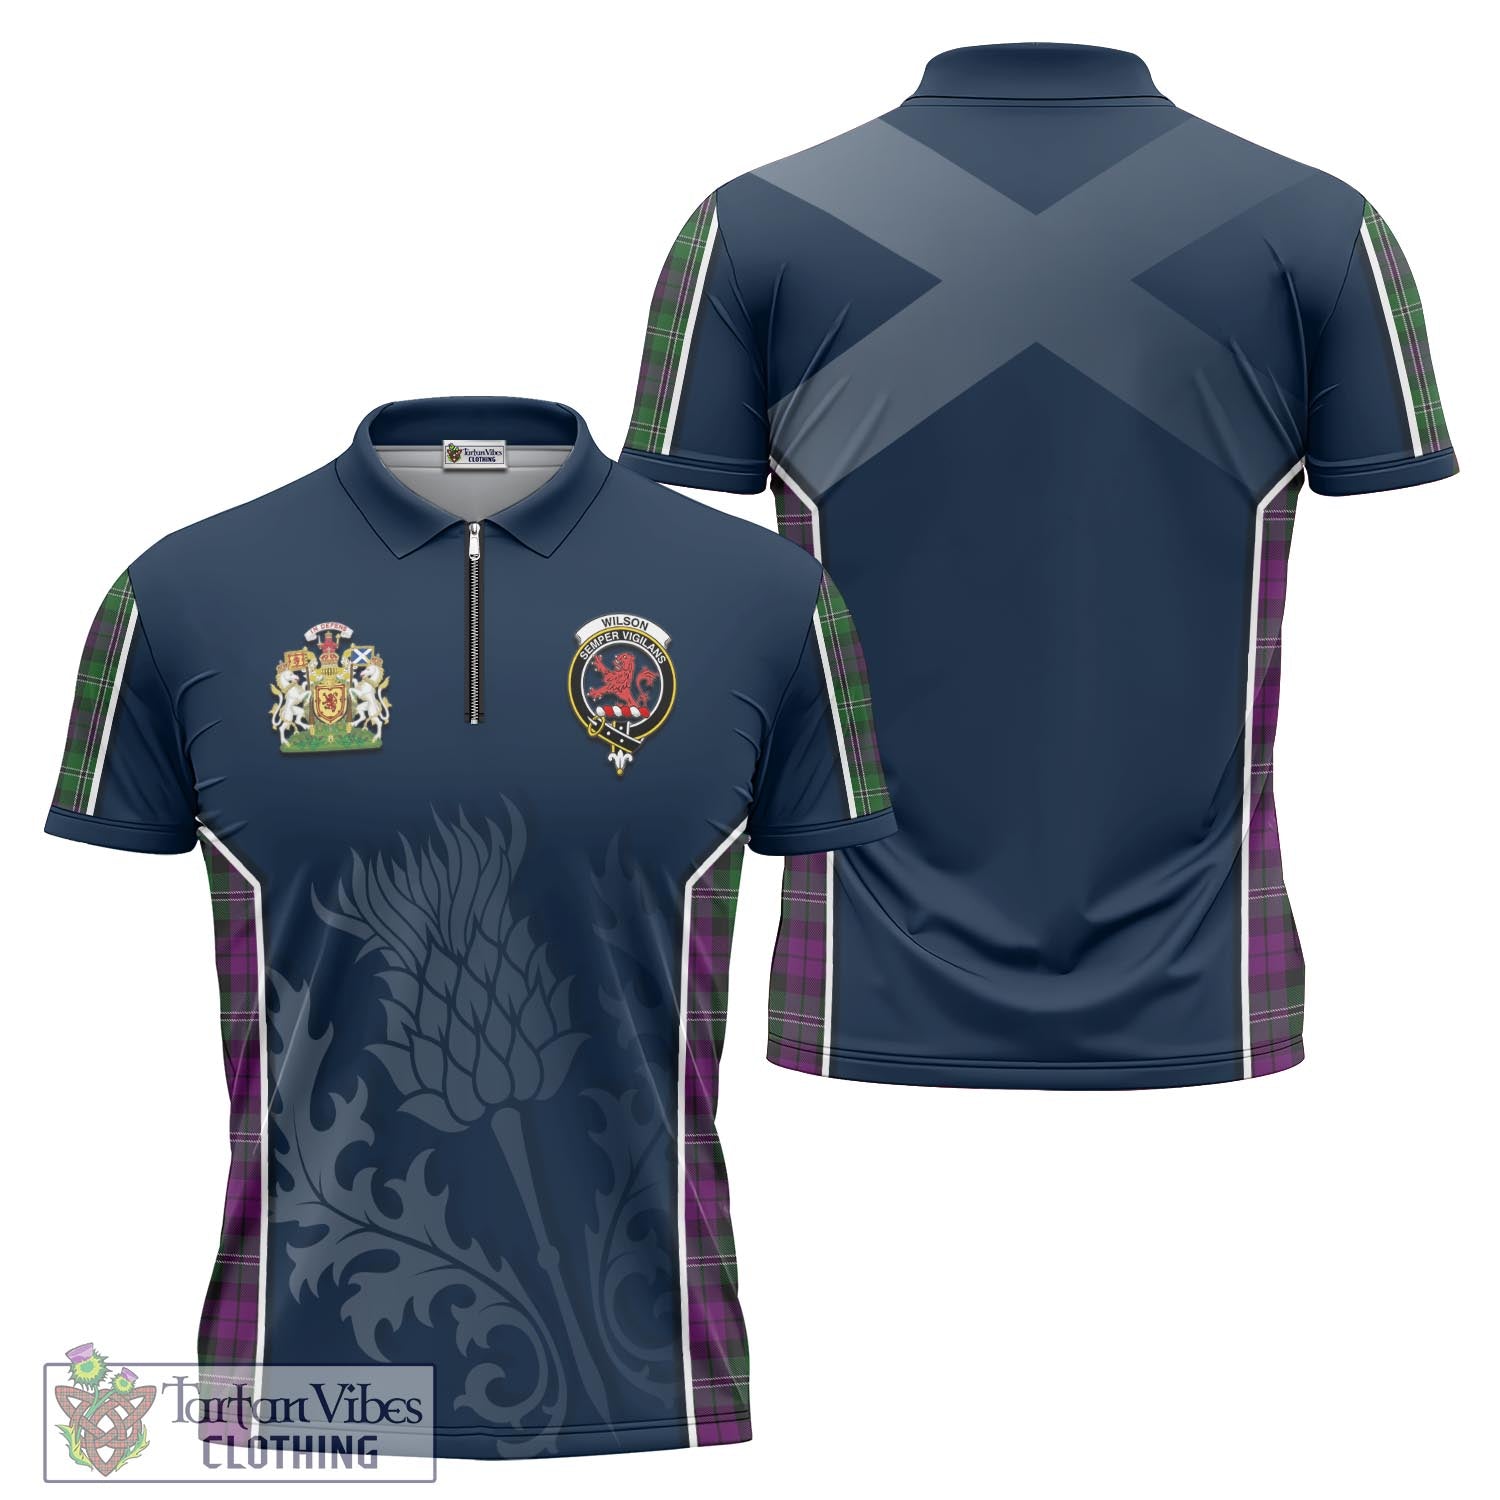 Tartan Vibes Clothing Wilson Tartan Zipper Polo Shirt with Family Crest and Scottish Thistle Vibes Sport Style